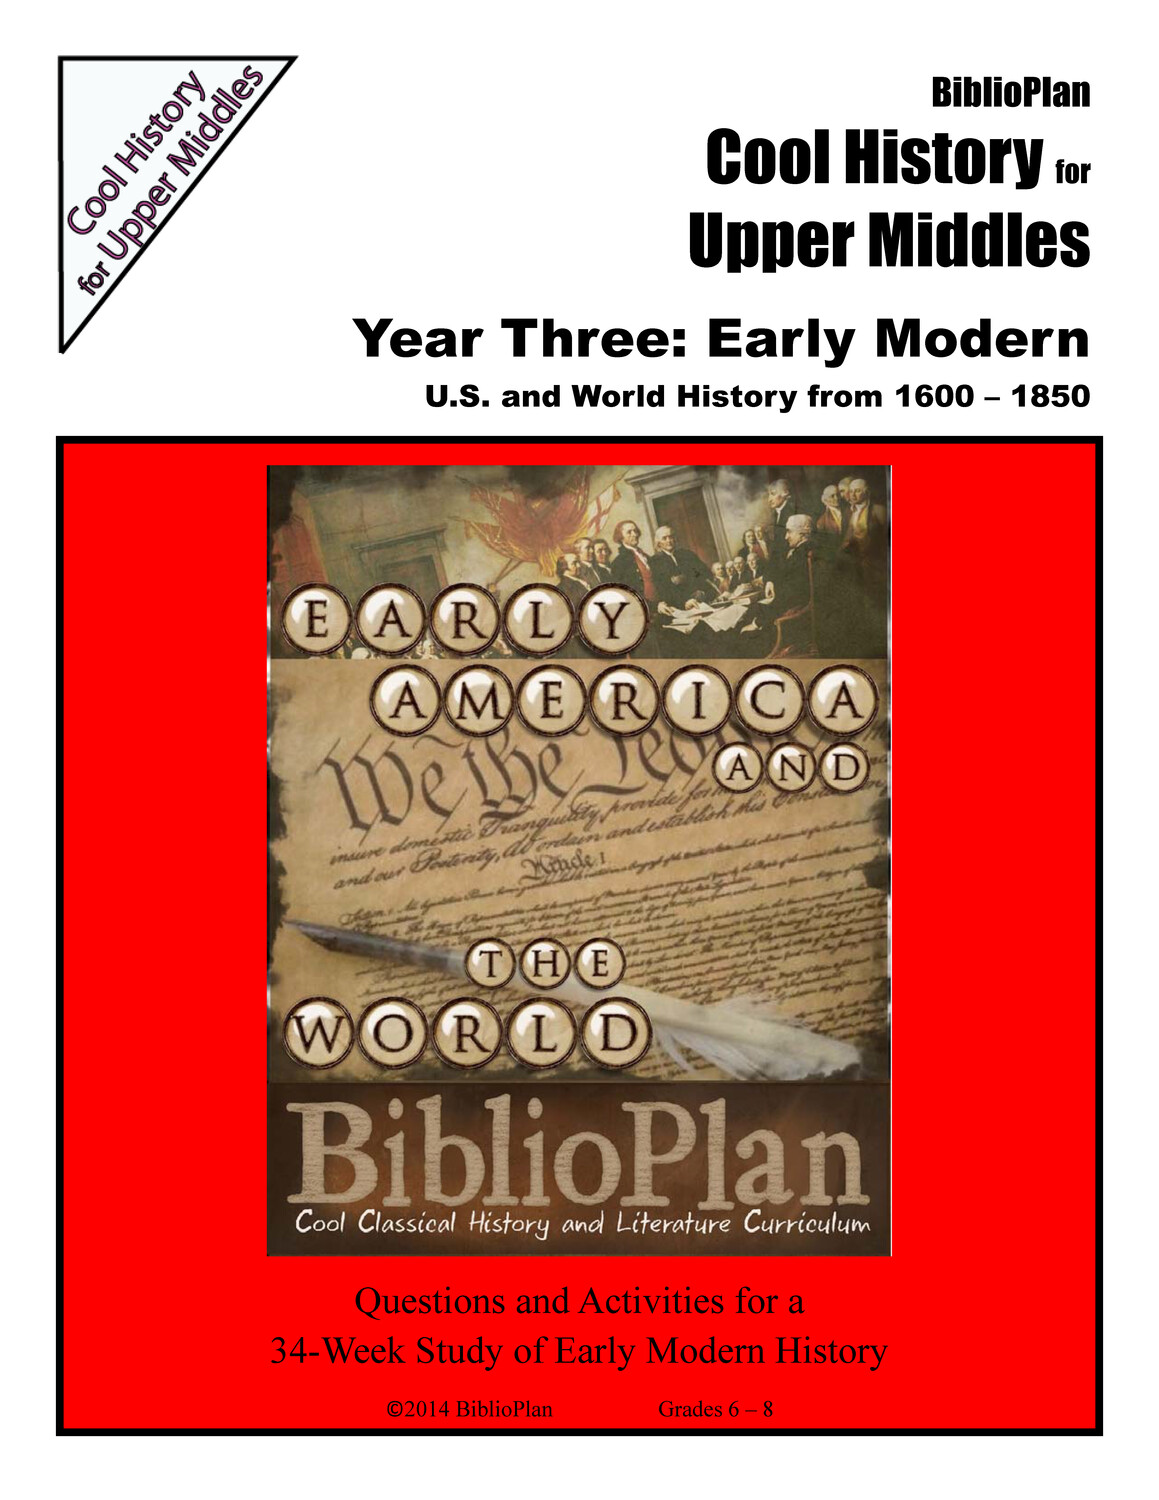 Early Modern Cool History for Upper Middles Ebook